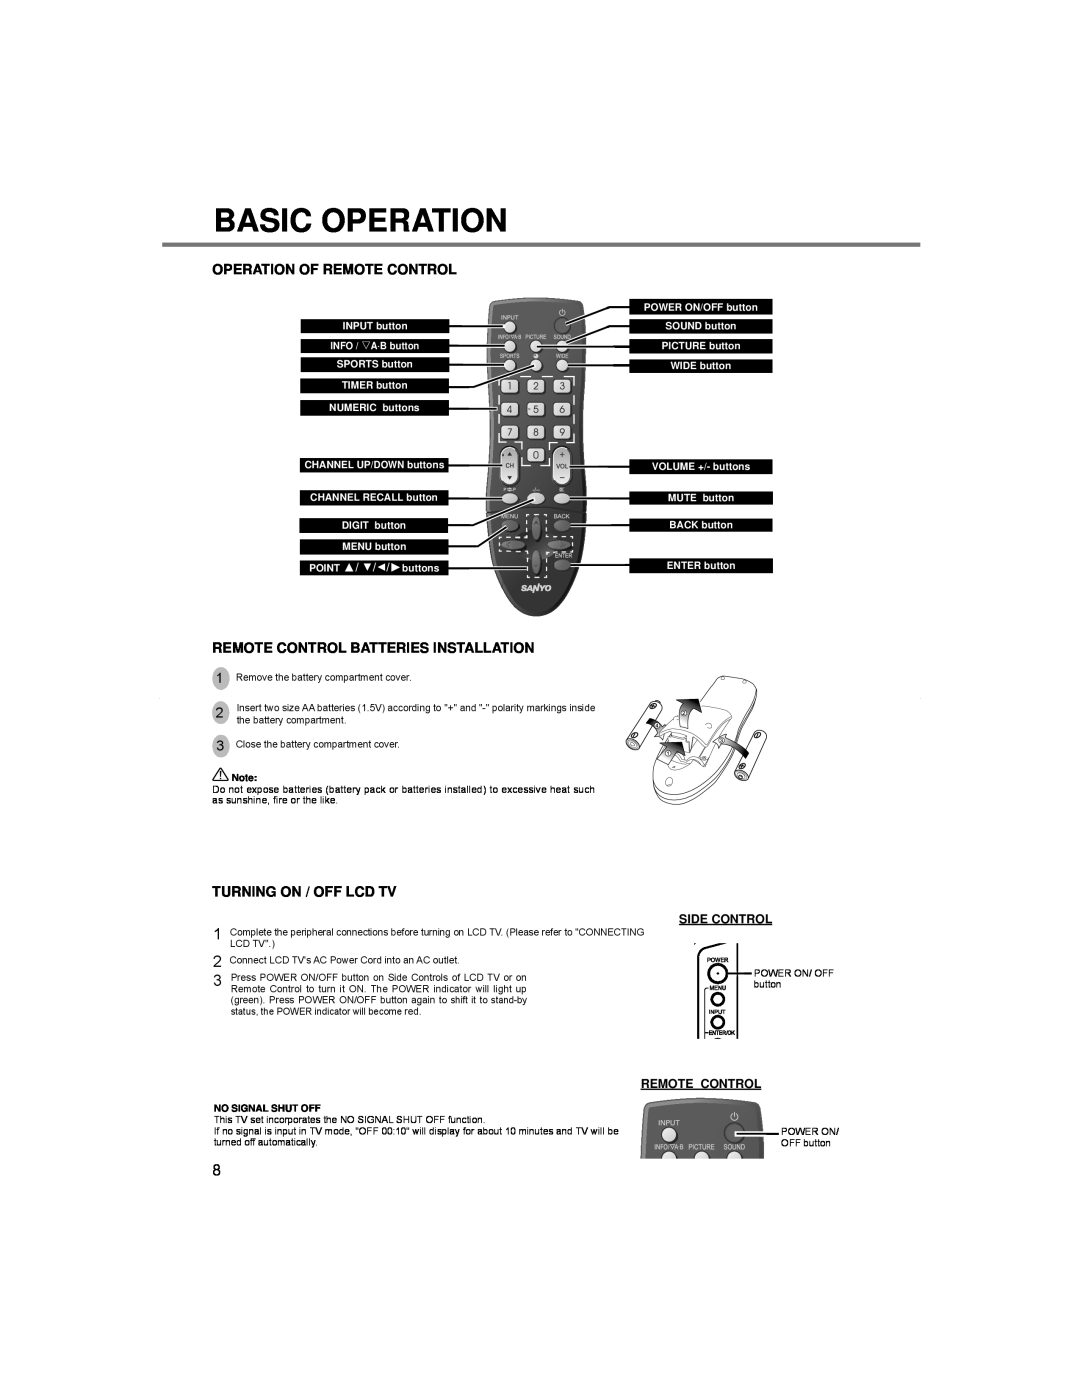 Sanyo LCE-24C100F(S) Basic Operation, Operation Of Remote Control, Remote Control Batteries Installation, NUMERIC buttons 